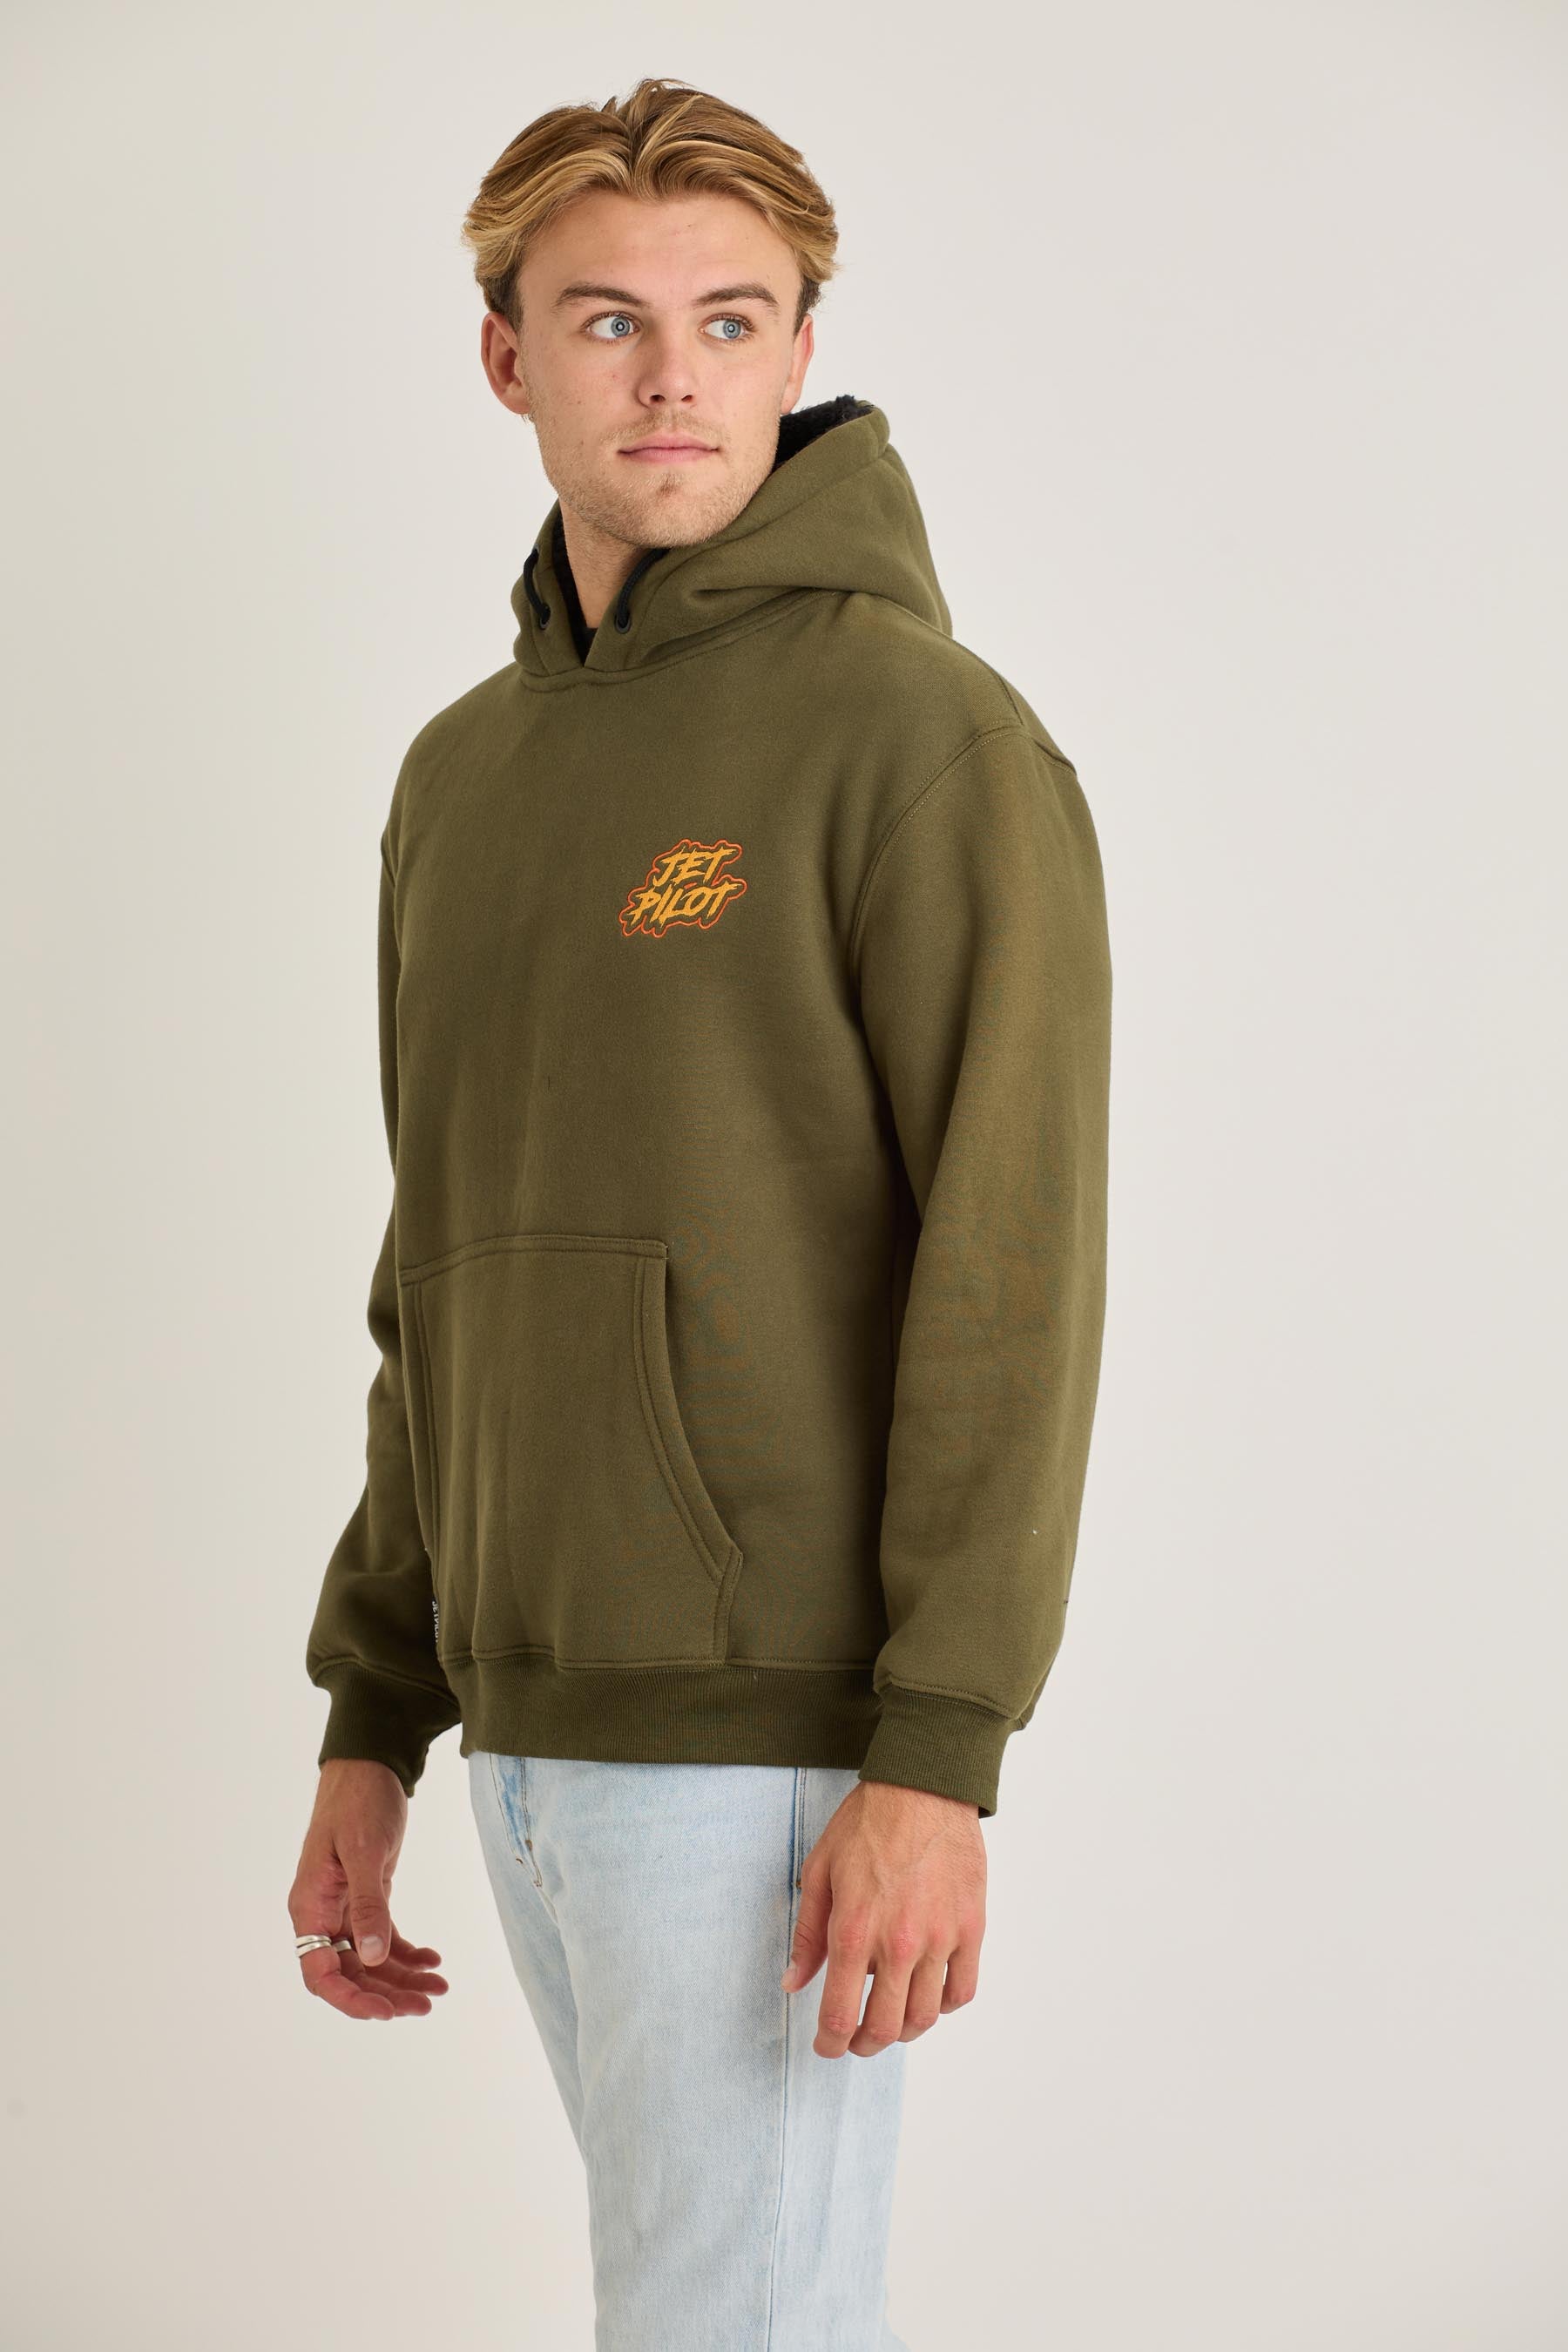 Jetpilot Yowie Sherpa Mens Pullover - Army 4